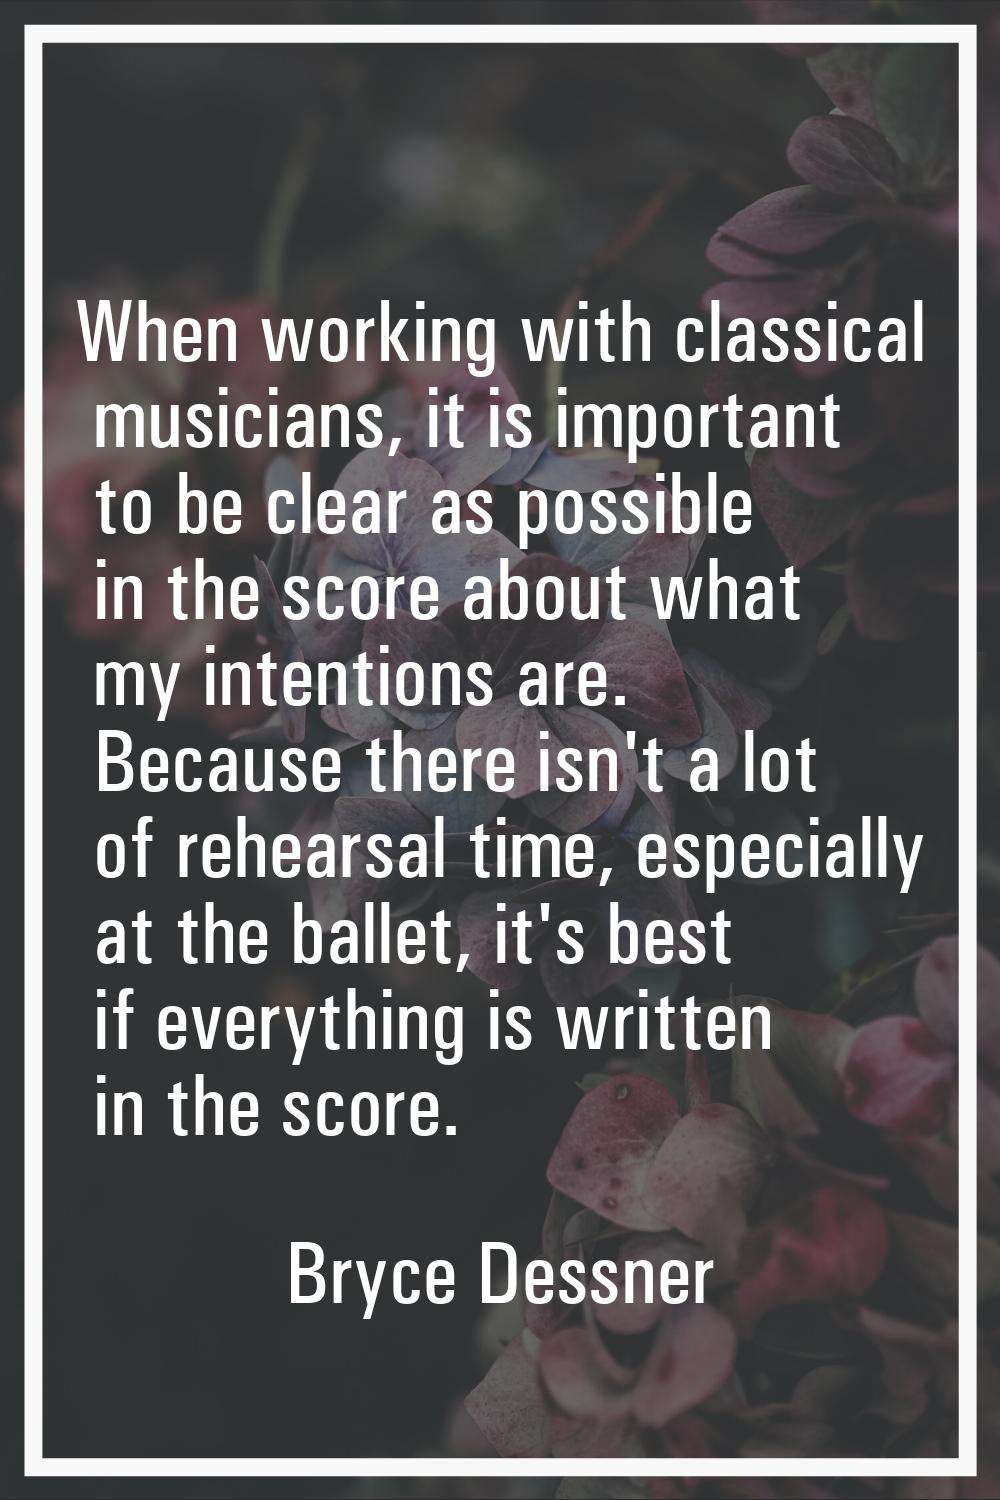 When working with classical musicians, it is important to be clear as possible in the score about w